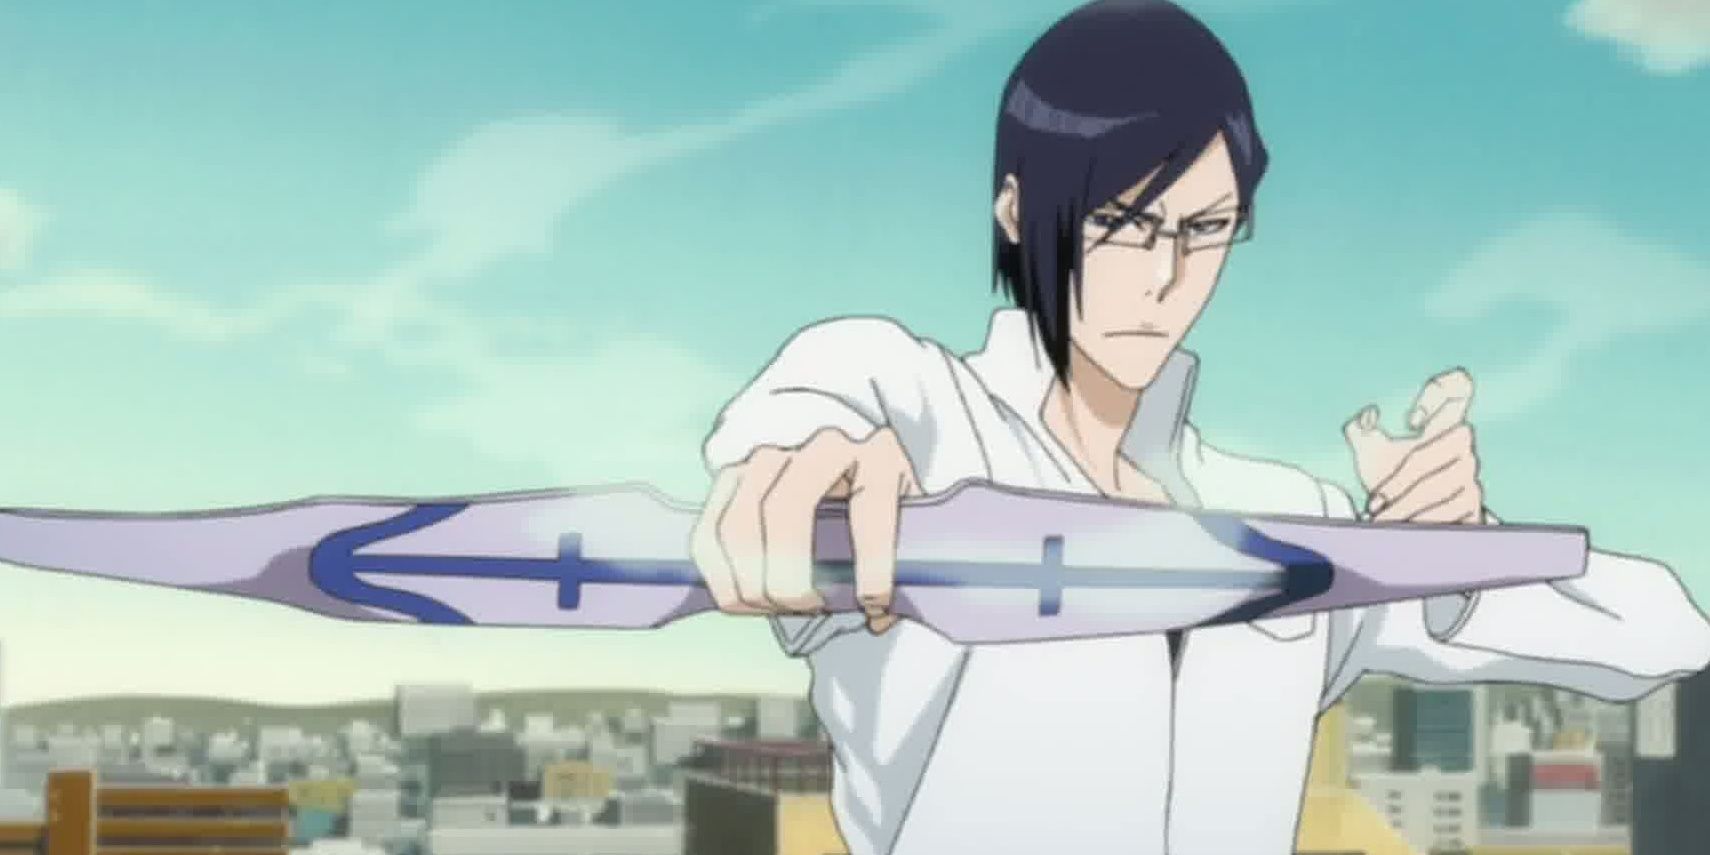 uryu with his bow